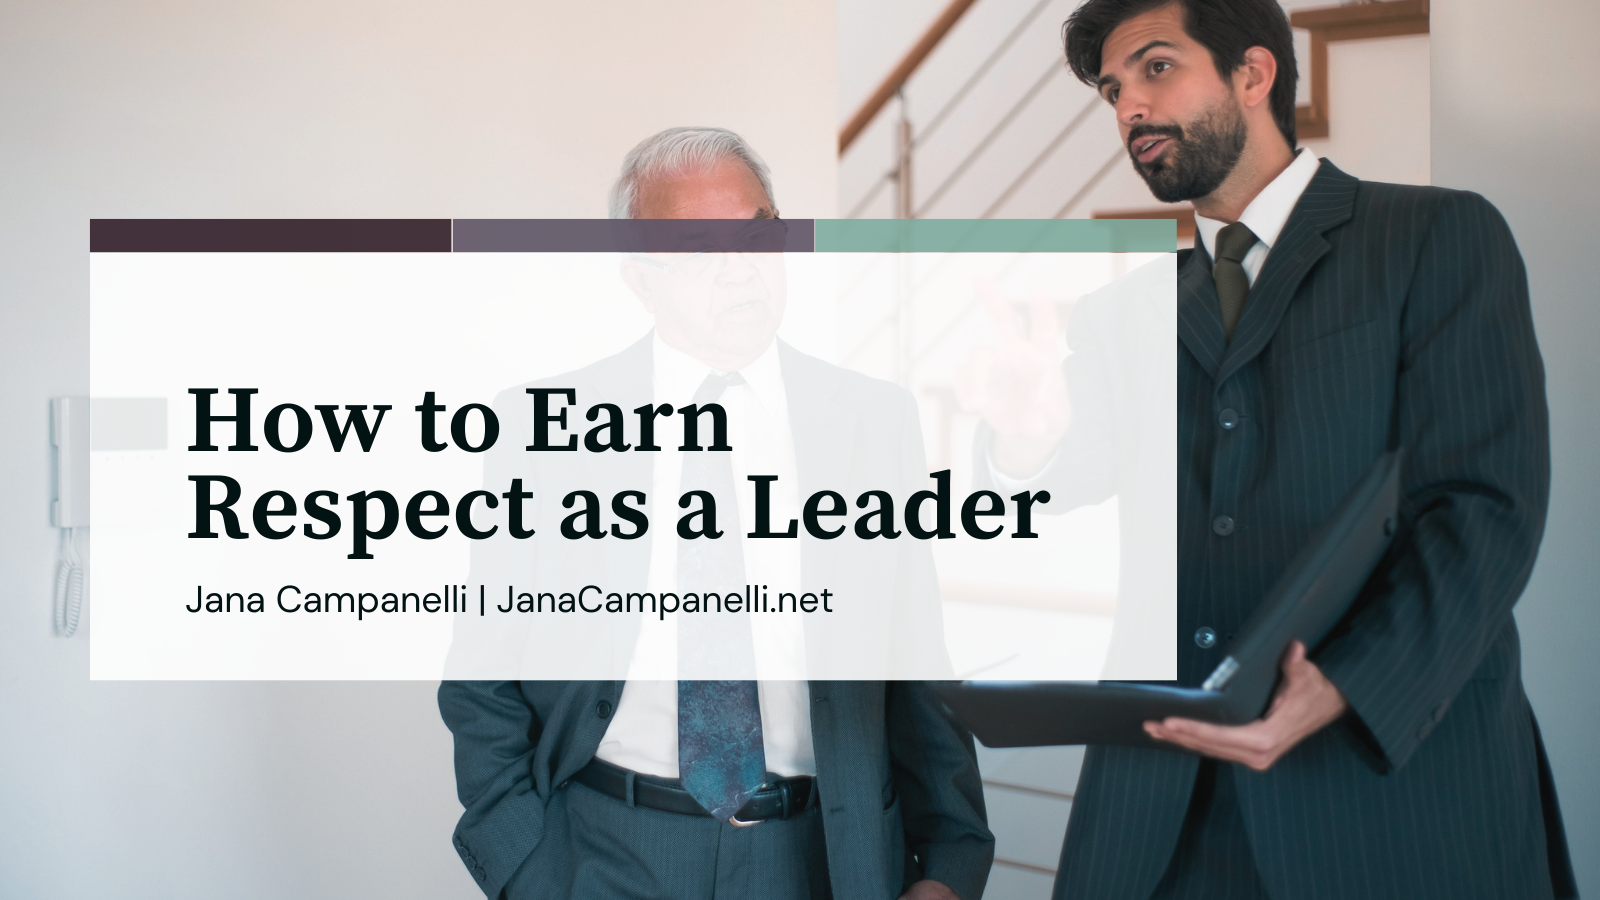 Jana Campanelli .net How to earn respect as a leader